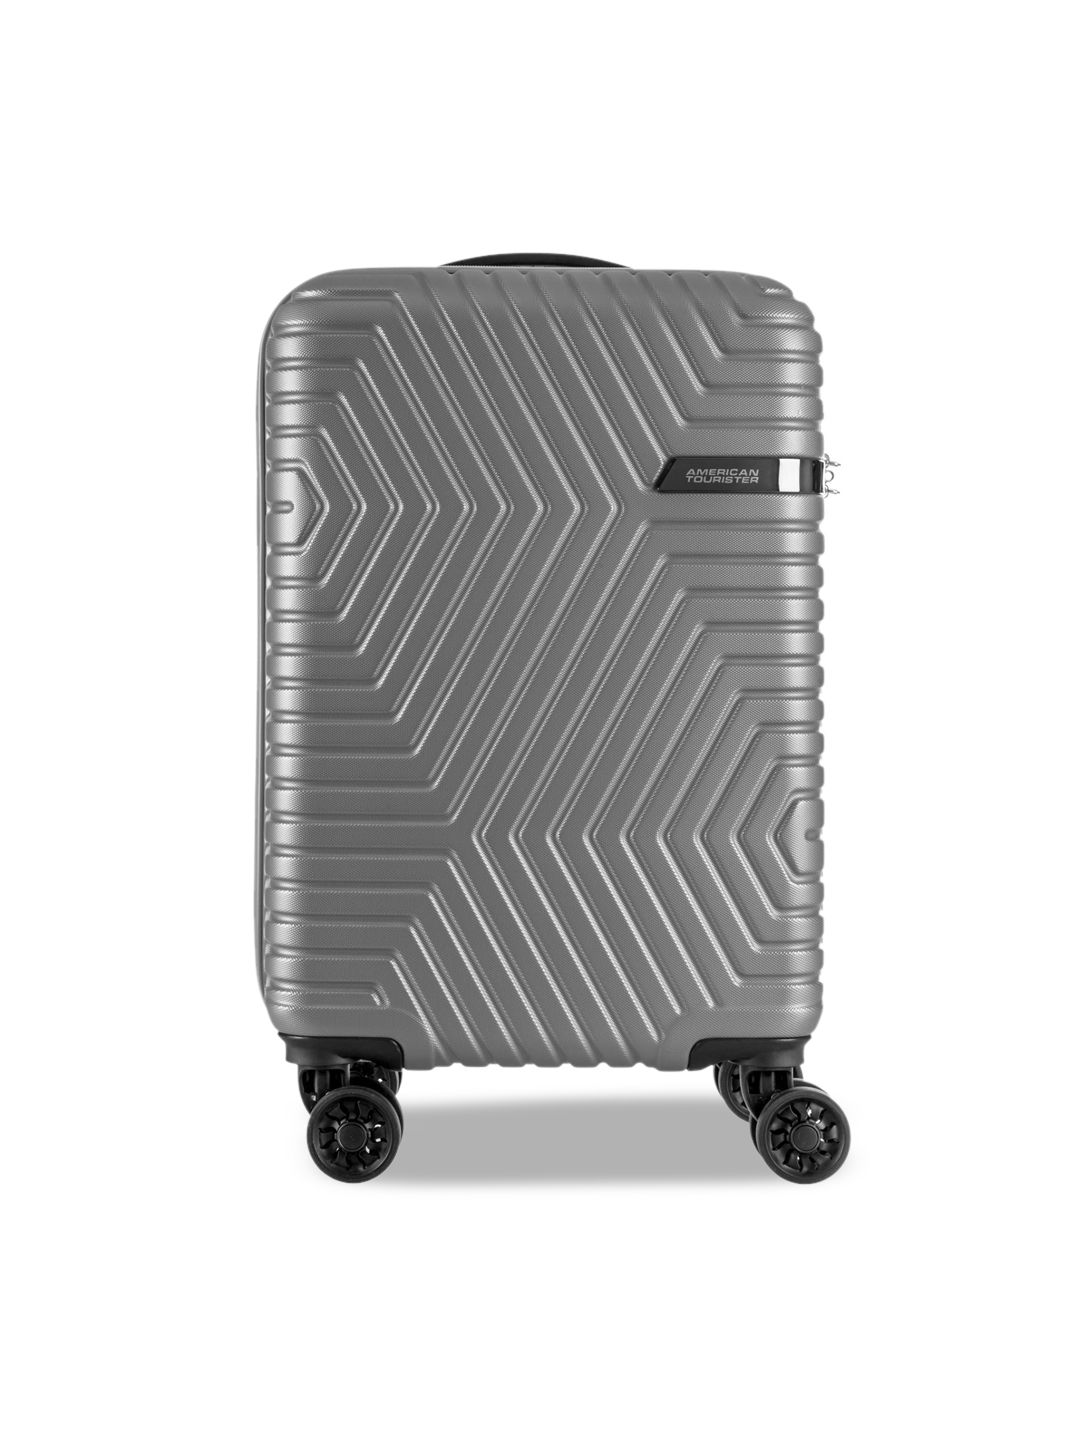 AMERICAN TOURISTER Grey Textured Hard-Sided Medium Trolley Suitcase Price in India